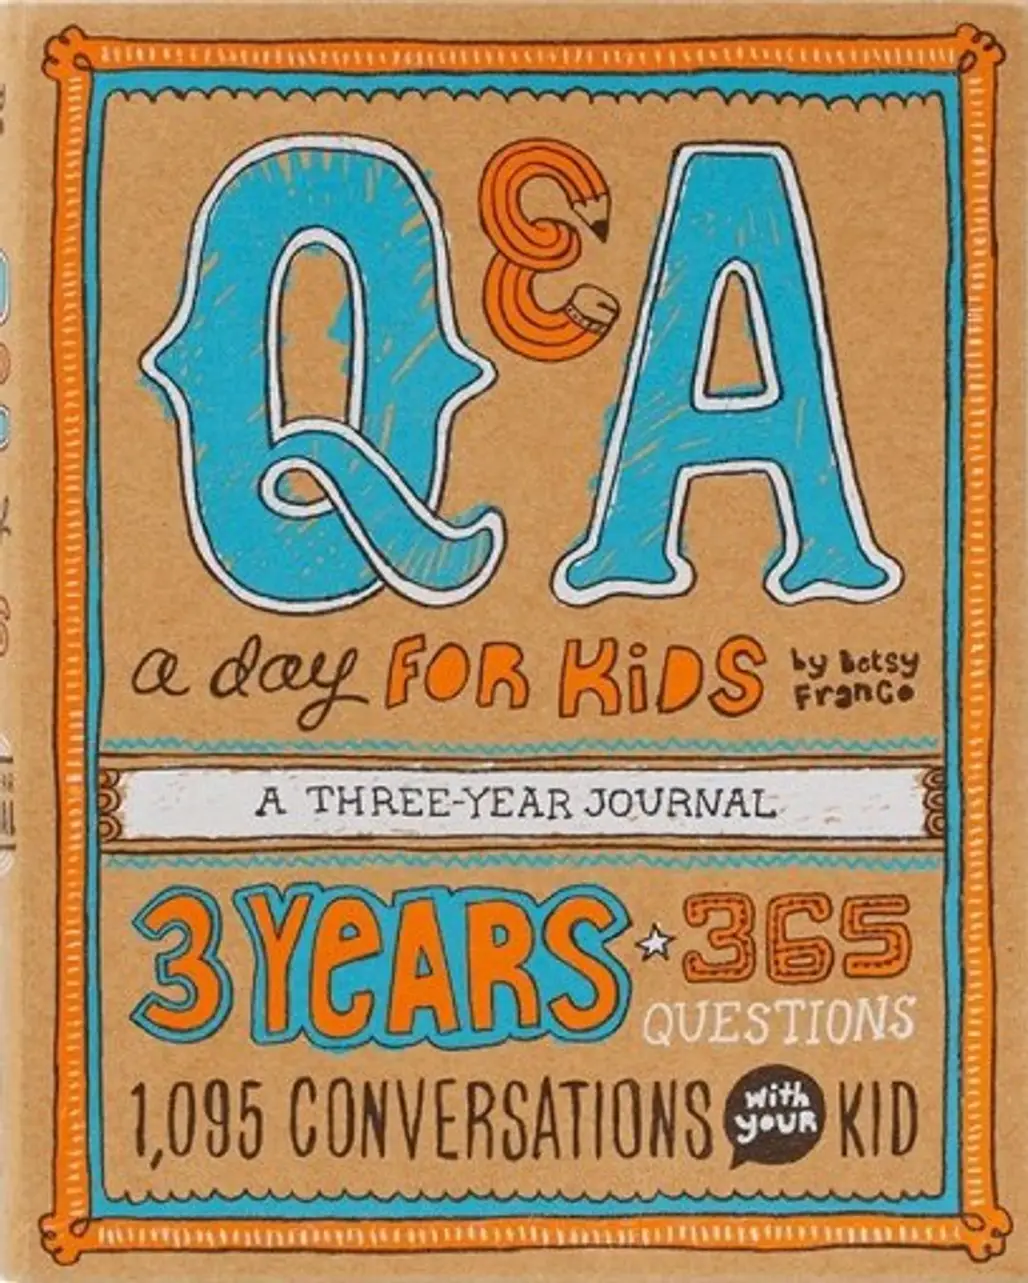 Q&a a Day for Me: a 3-Year Journal for Teens by Betsy Franco